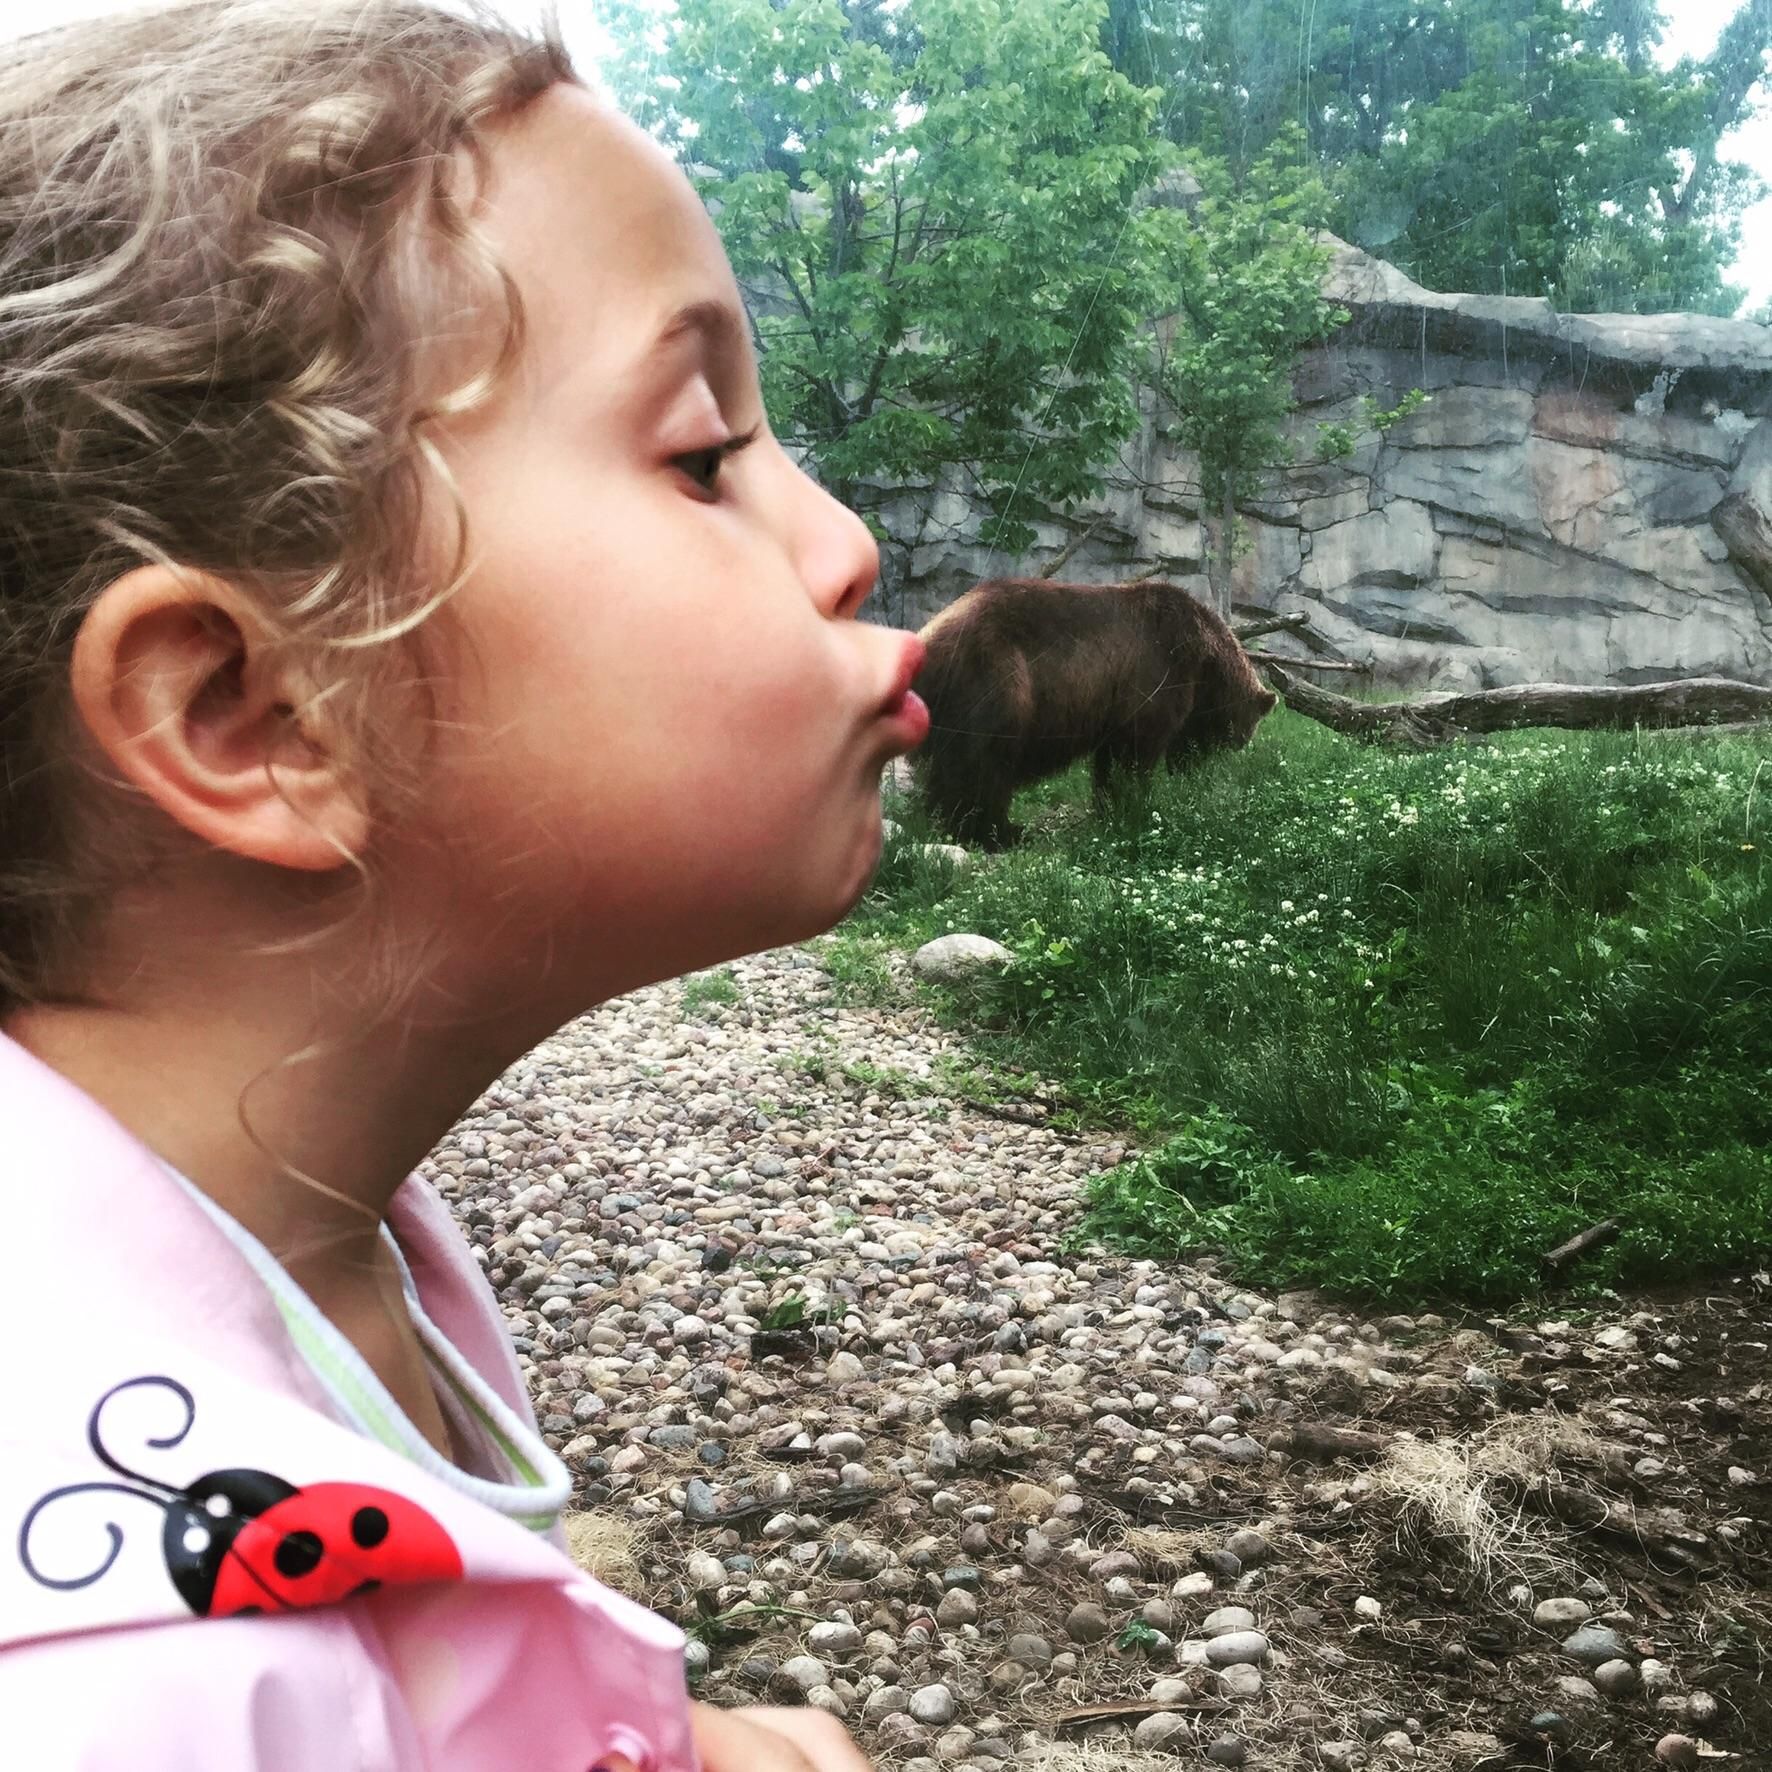 I told my daughter to pretend she was kissing the bear at the zoo.....